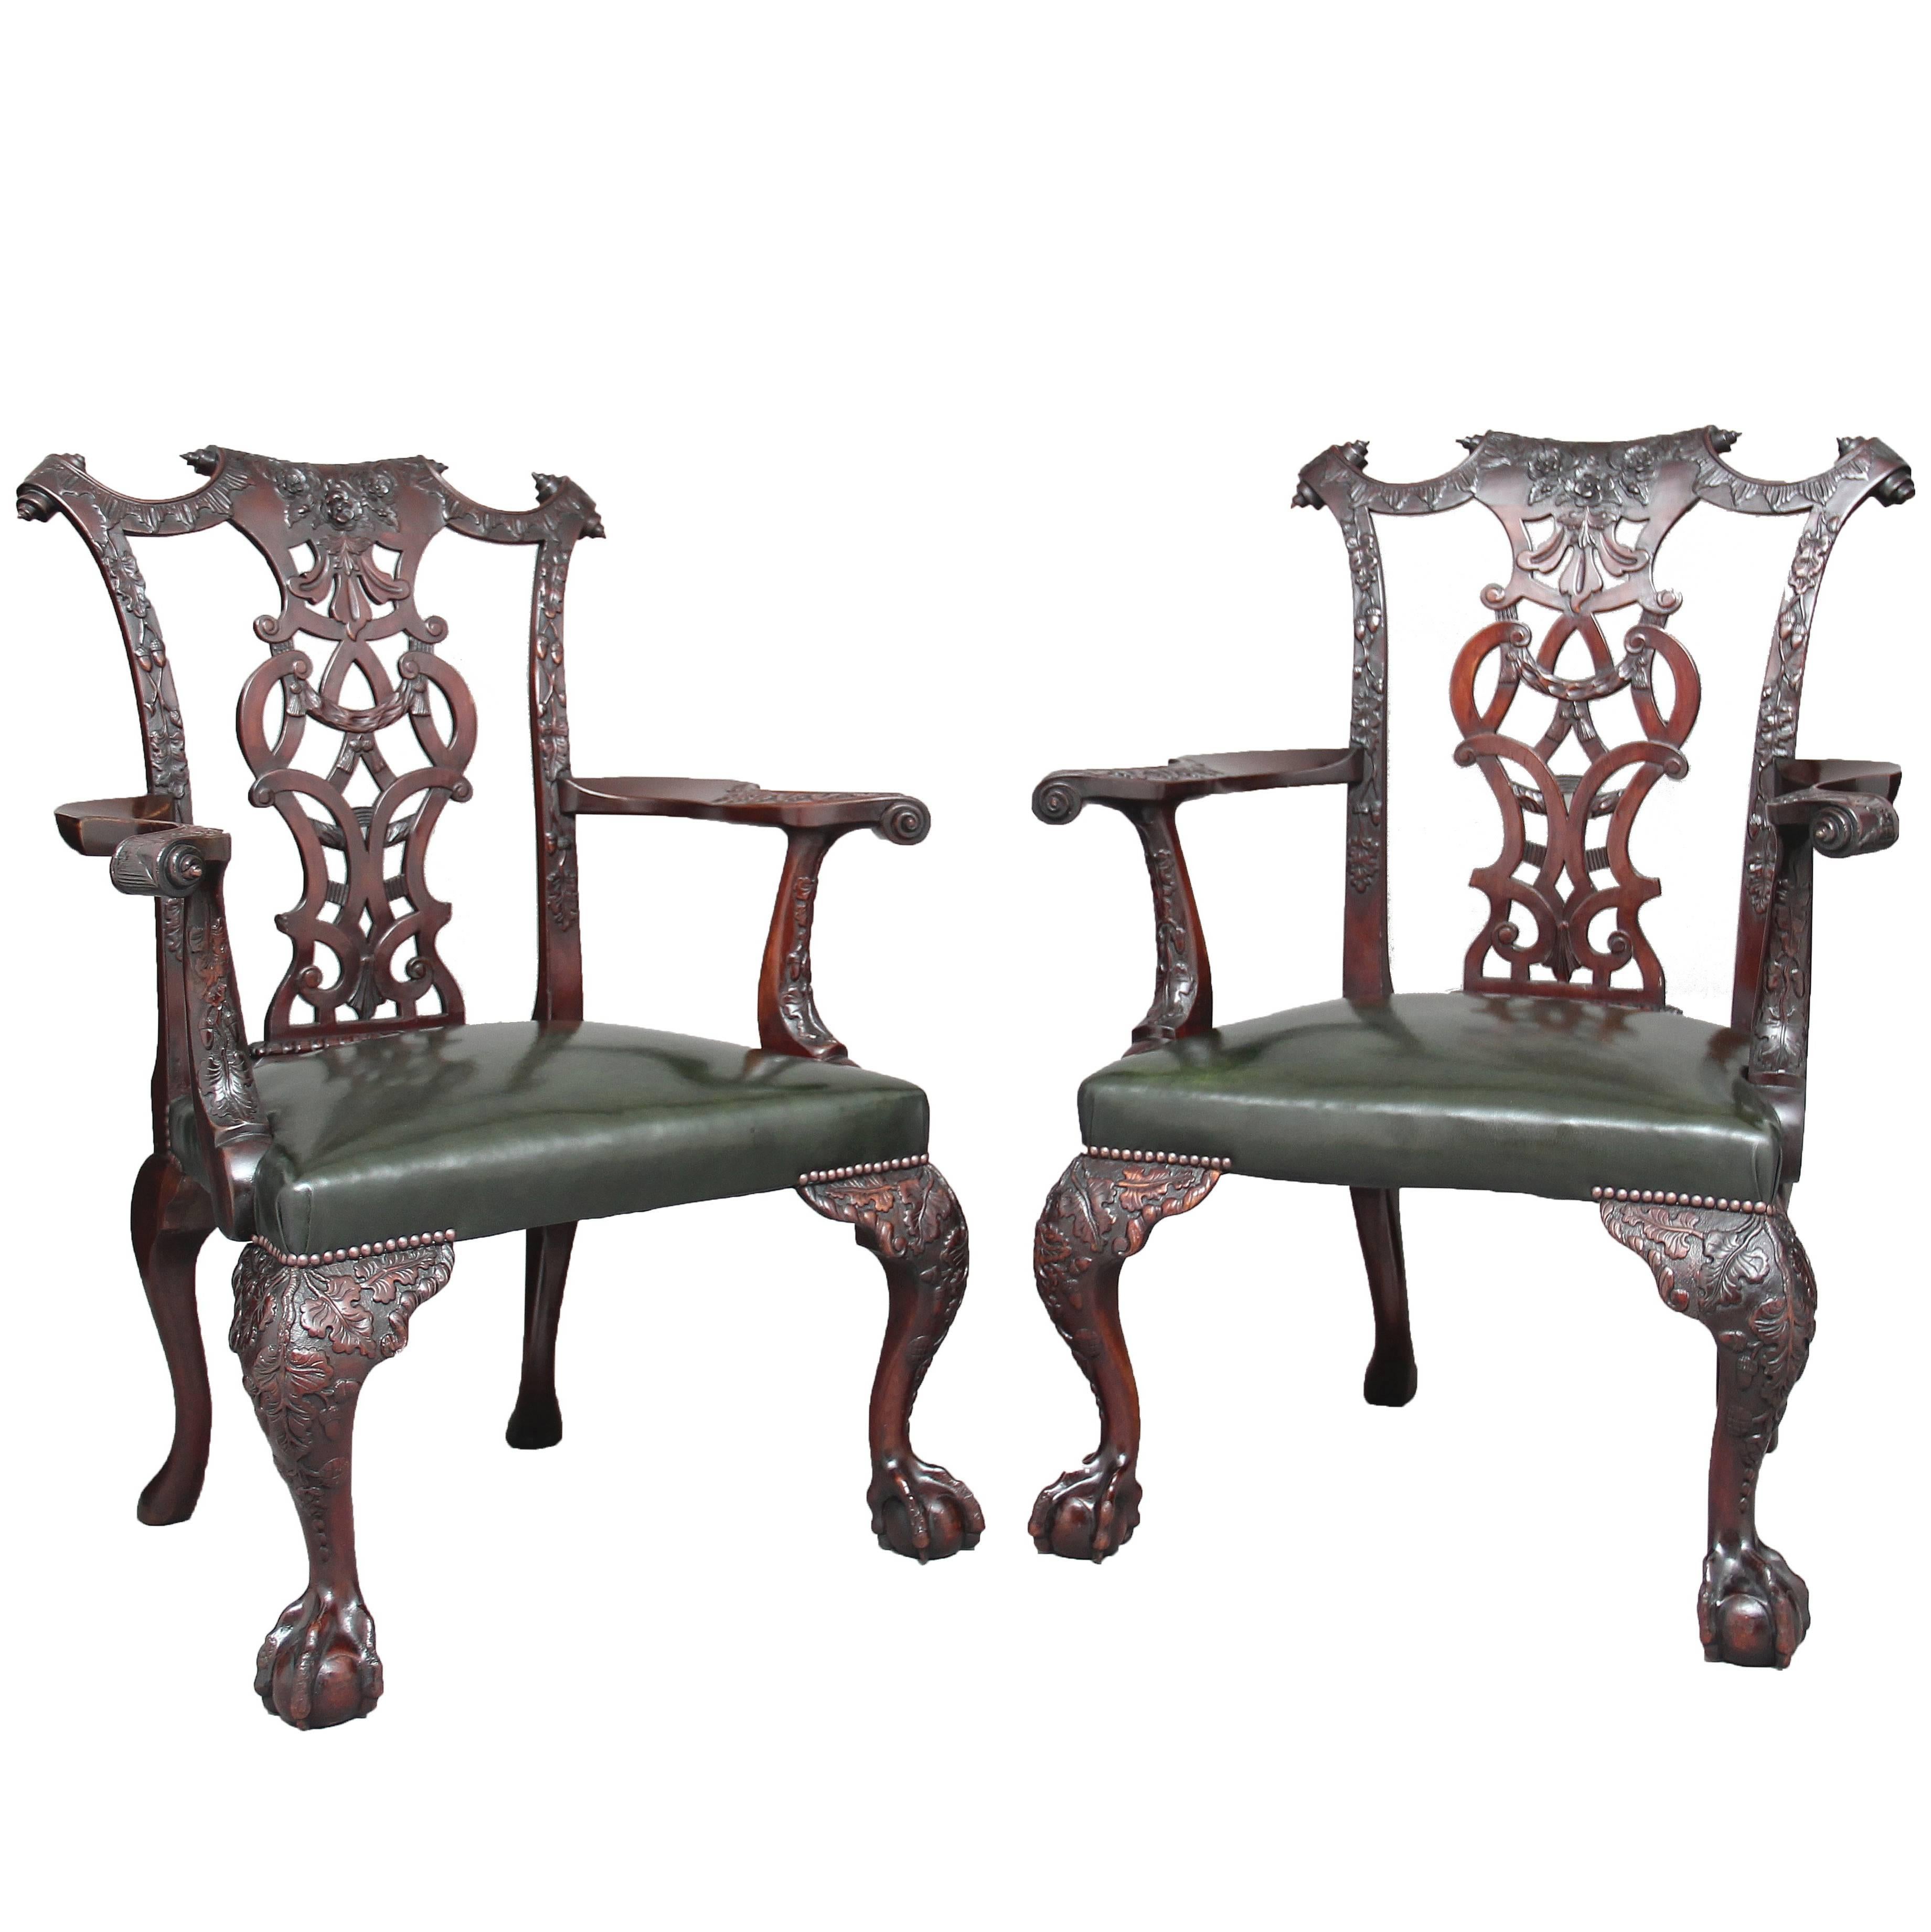 Fine Pair of 19th Century Chippendale Revival Mahogany Armchairs